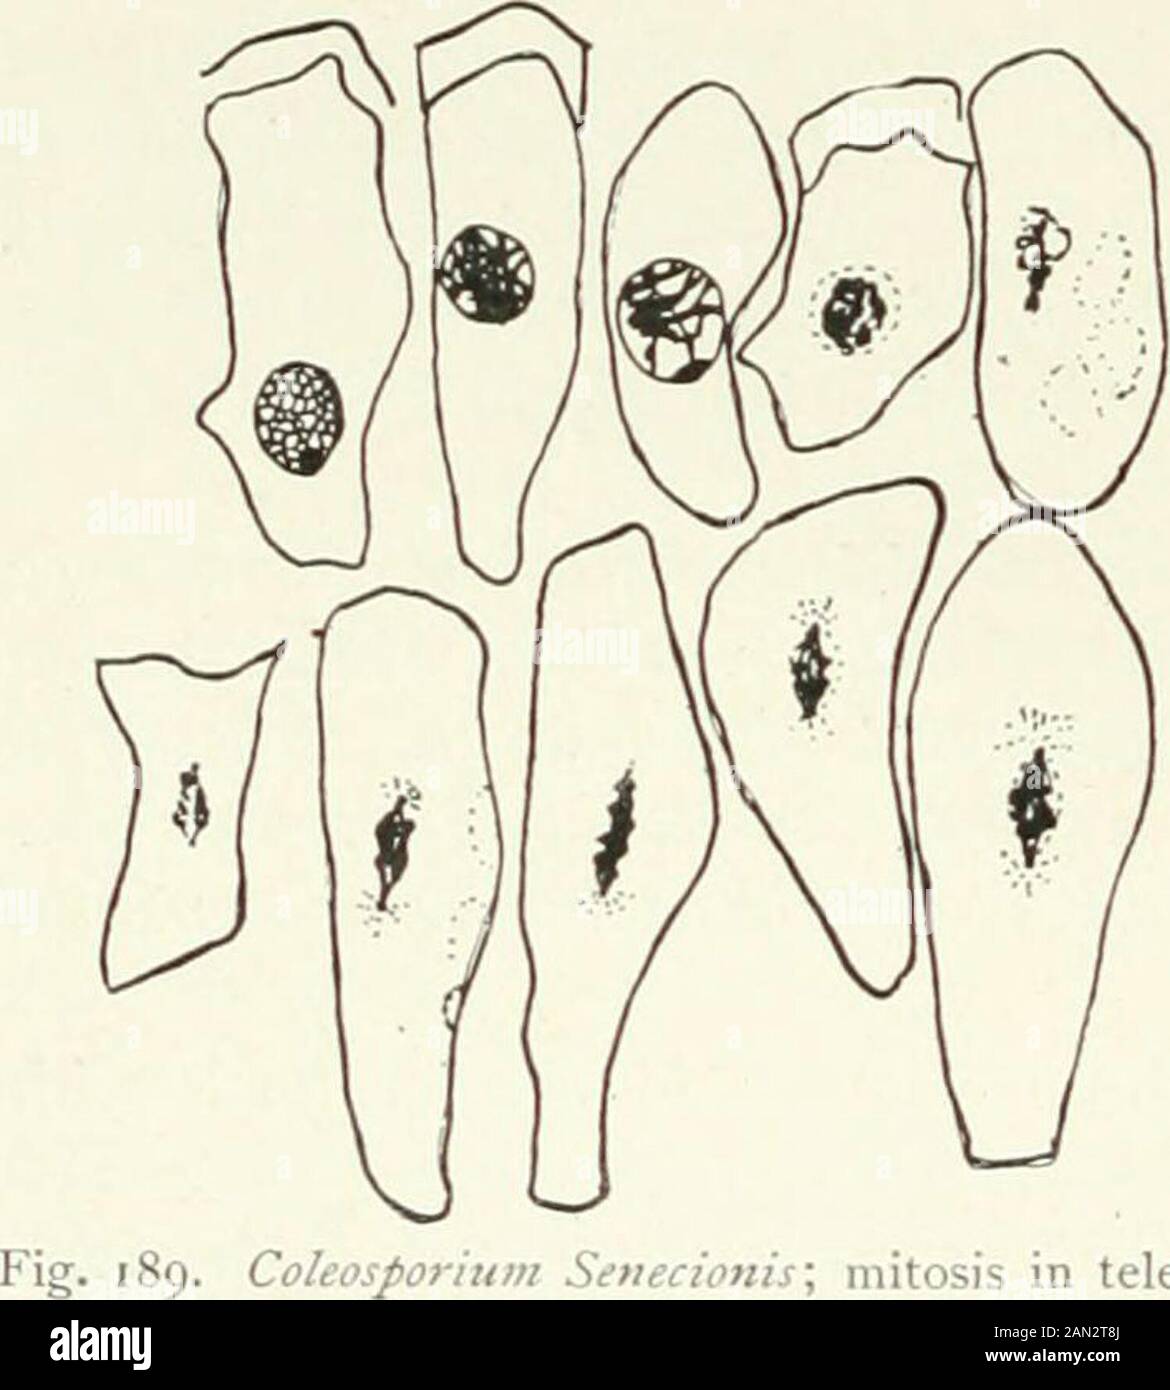 Fungi, Ascomycetes, Ustilaginales, Uredinales . succeededin recognizing several separatechromosomes; a similar stateof affairs has been recorded byChristman for Phragmidiumspeciosum so that it would ap-pear that the different speciesof rusts are at dissimilar levelsin this matter, though a furtherstudy of carefully fixed materialmight be undertaken with ad-vantage. In all cases, however, thedivisions of the fusion nucleusof the teleutospore are muchmore elaborate than those in thevegetative cells and show someof the characteristics of a meioticIn Coleosporium (fig. 189) the fusion nucleus at f Stock Photo